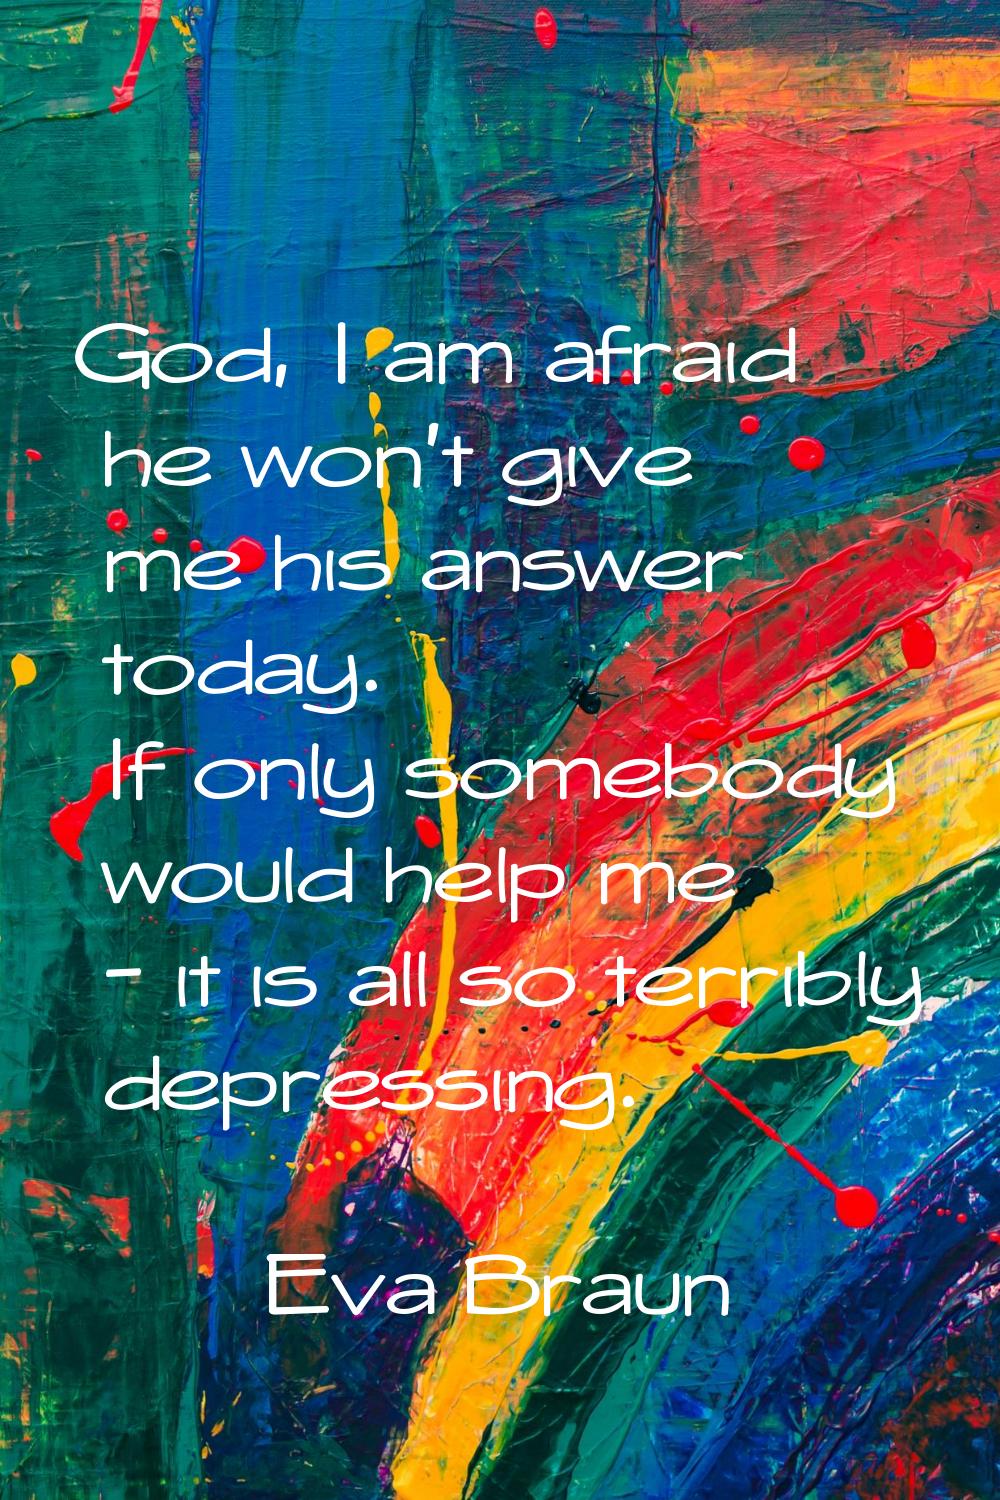 God, I am afraid he won't give me his answer today. If only somebody would help me - it is all so t